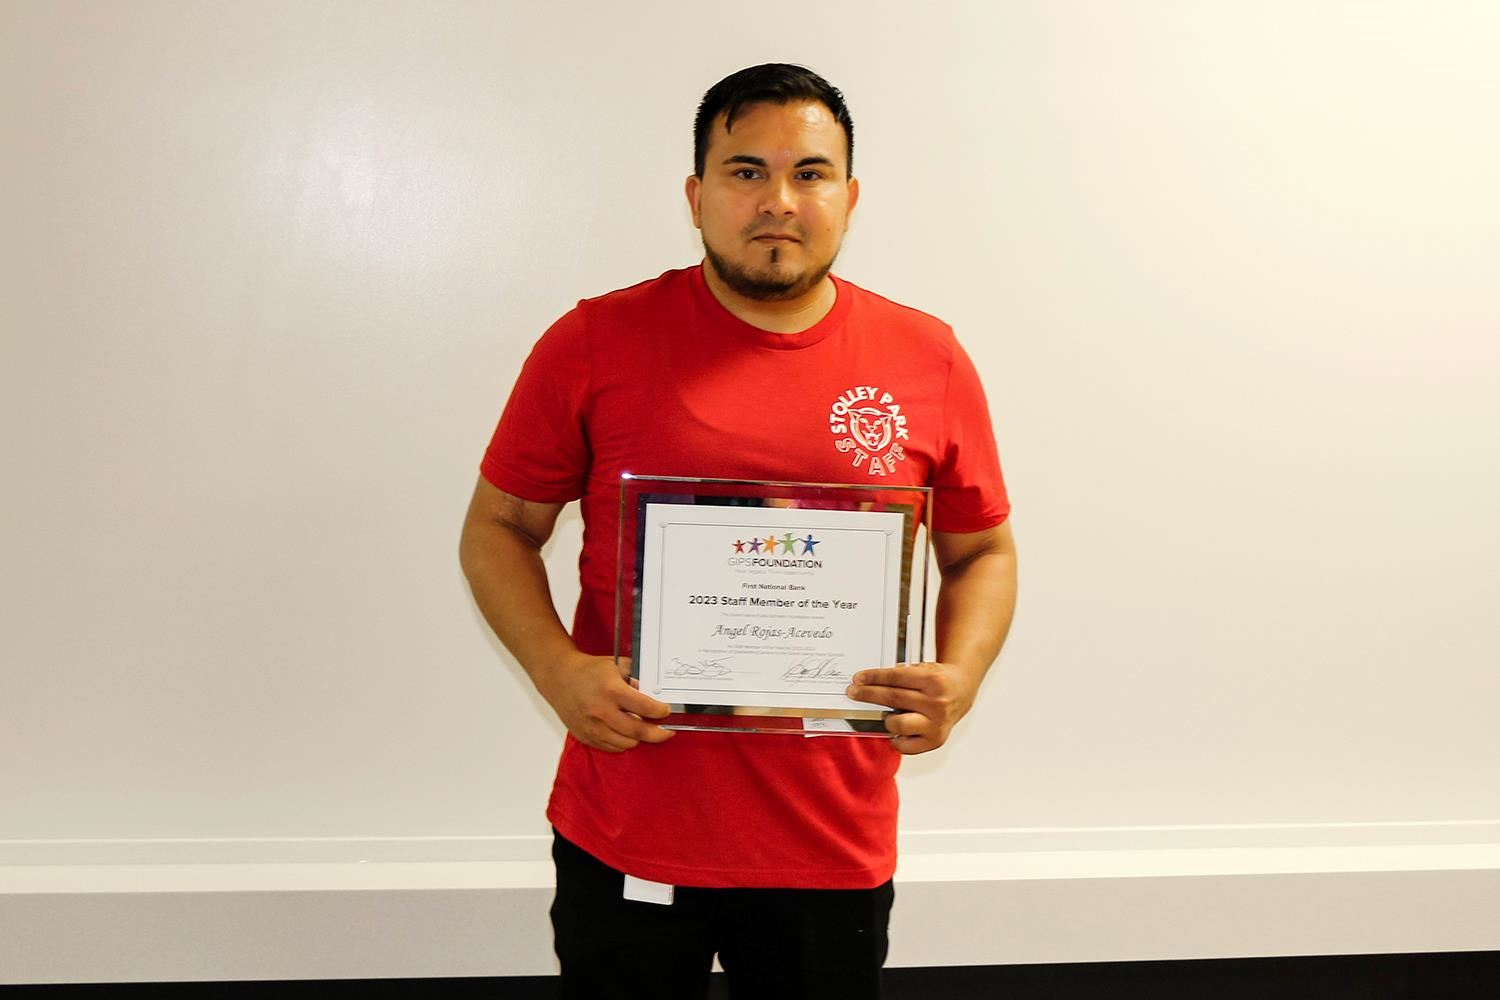 Angel Rojas Acevedo standing with his Staff Member of the Year plaque